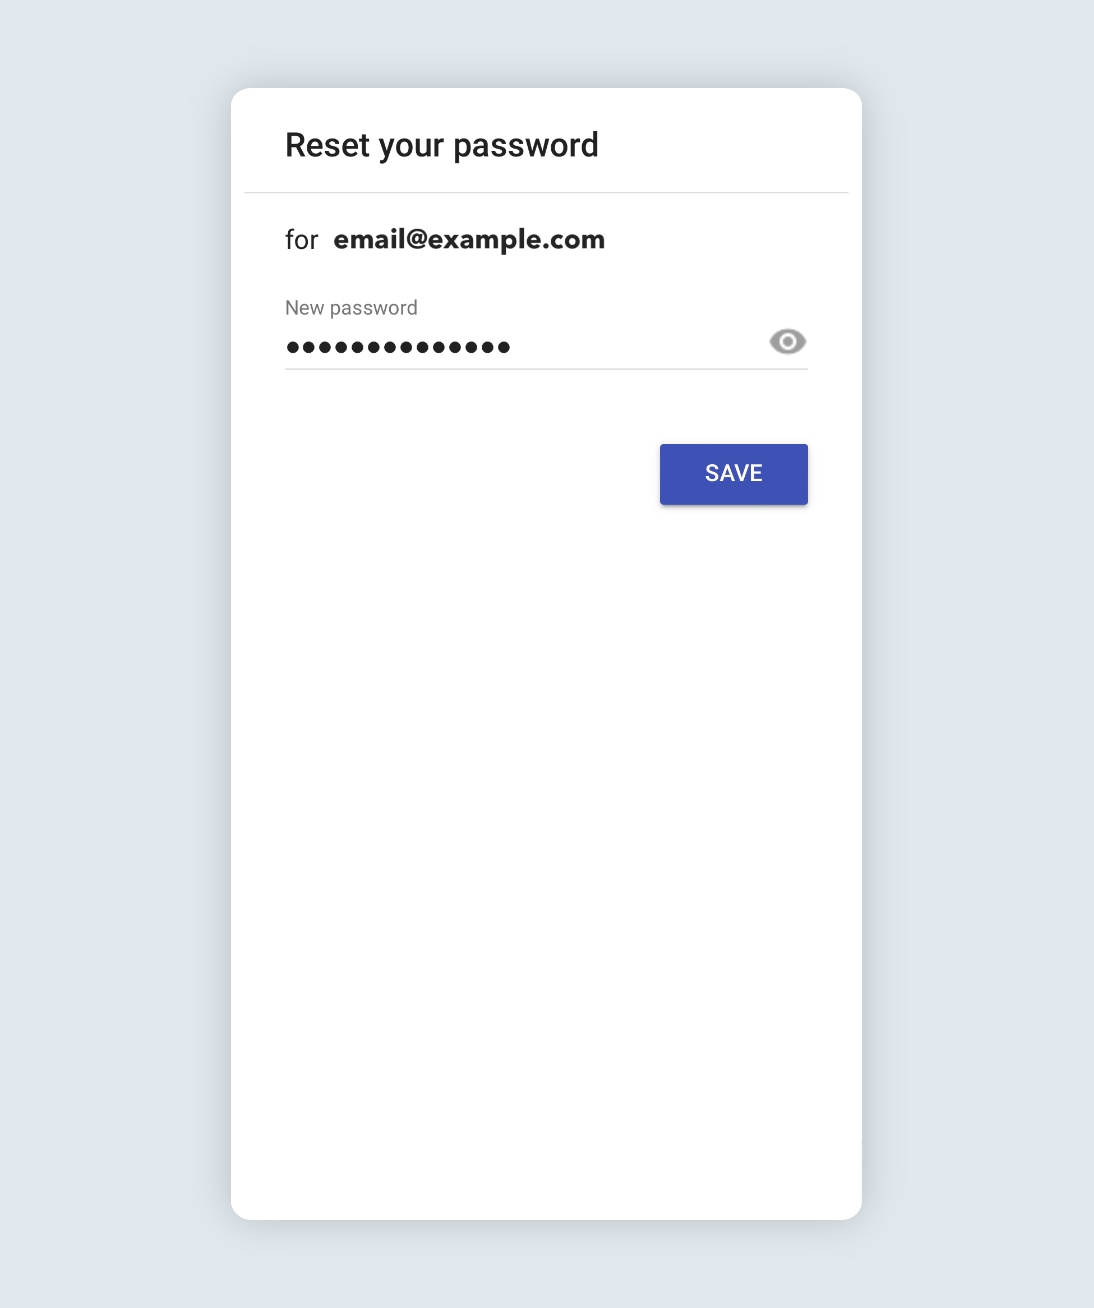 reset password screen with email and new password entered